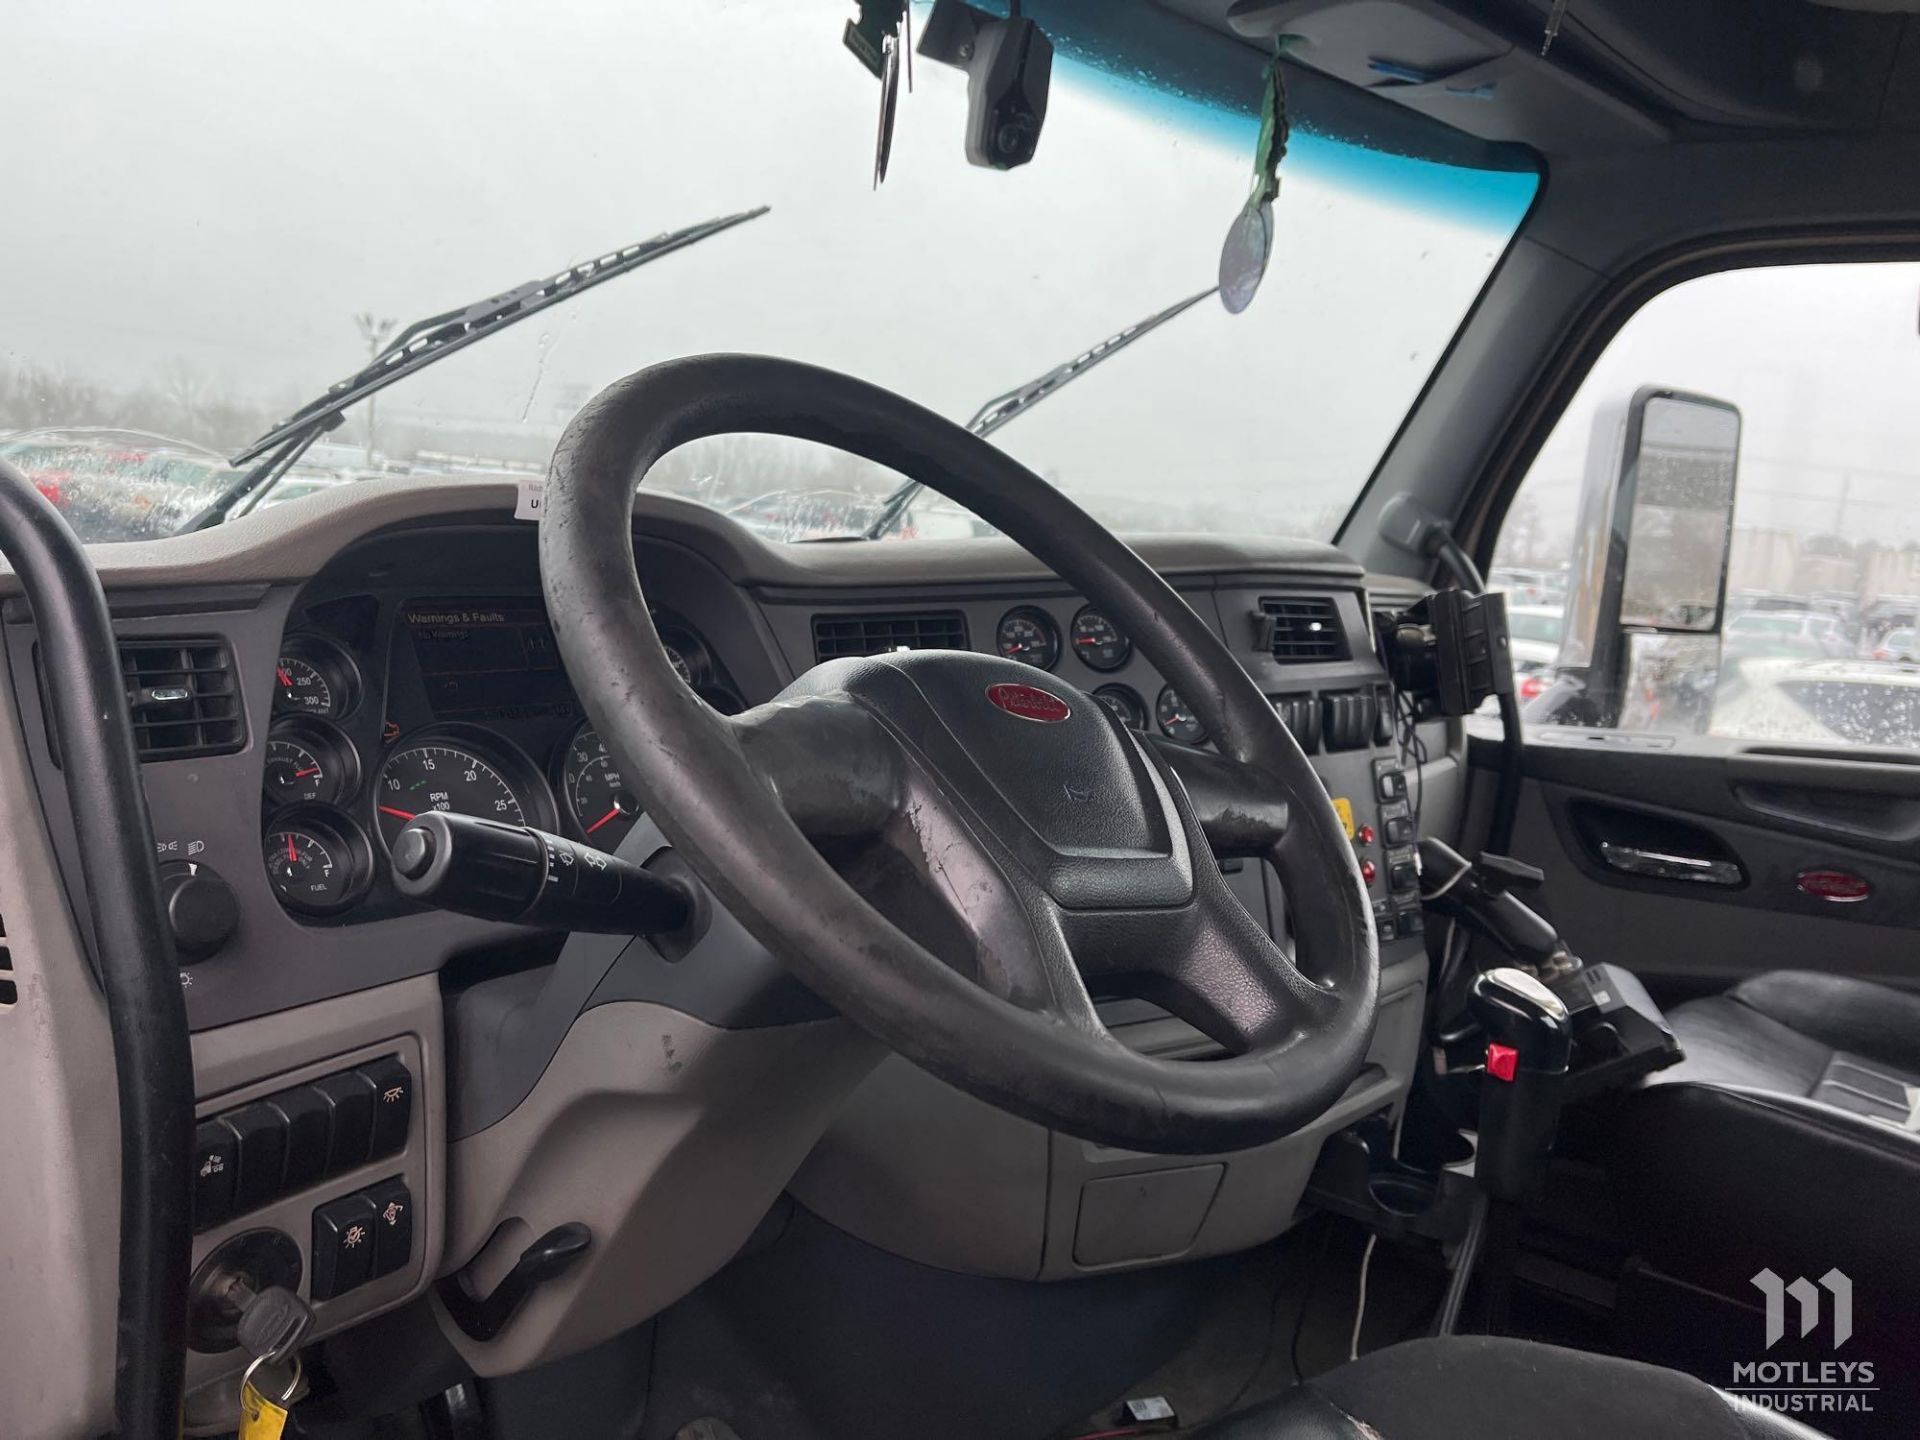 2016 Peterbilt Class 8 Day Cab Road Tractor - Image 7 of 23